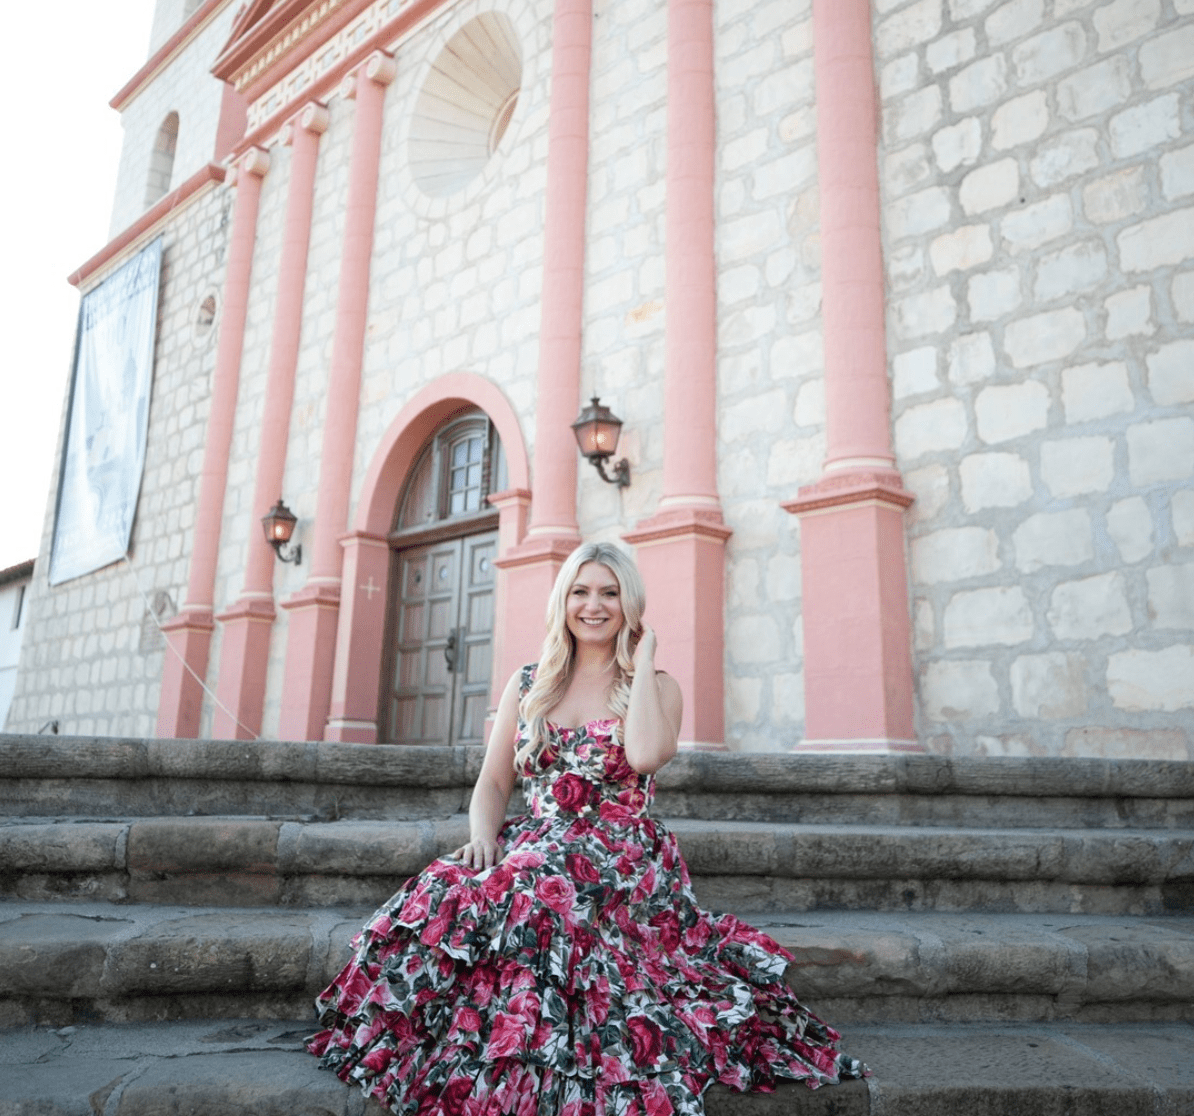 Emily Williams Sitting on the Steps in a Floral Dress